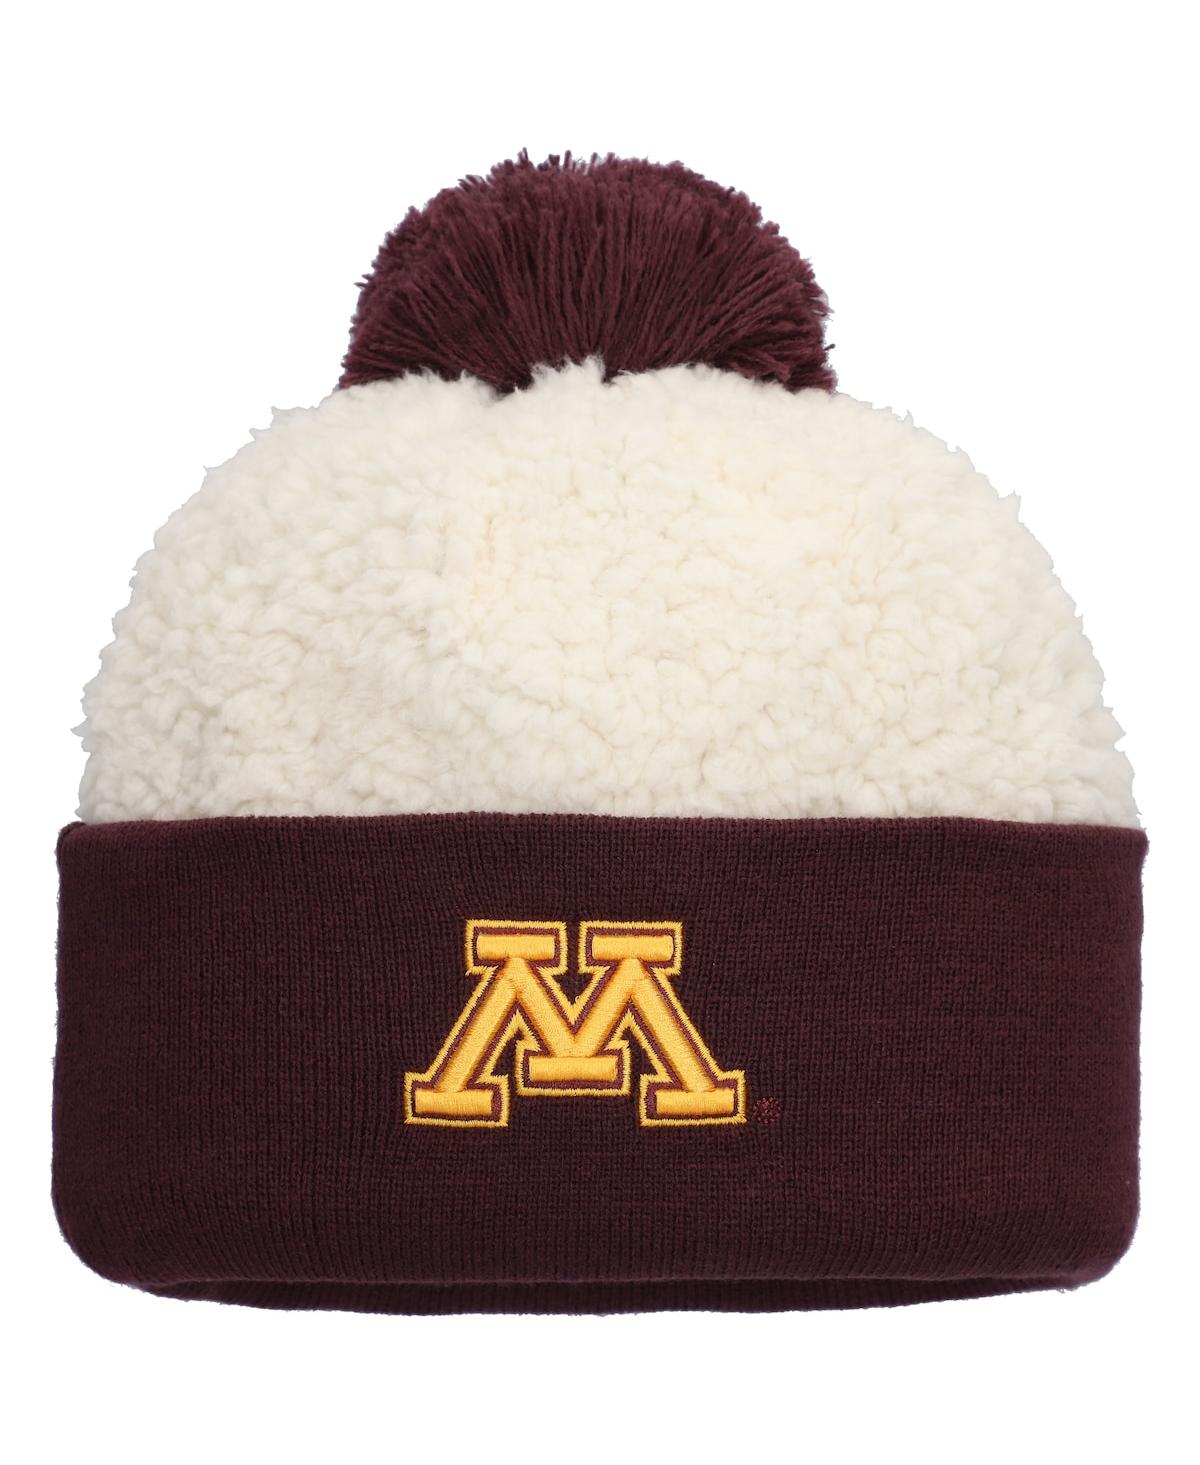 Women's Top of the World Cream Minnesota Golden Gophers Grace Sherpa Cuffed Knit Hat with Pom - Cream